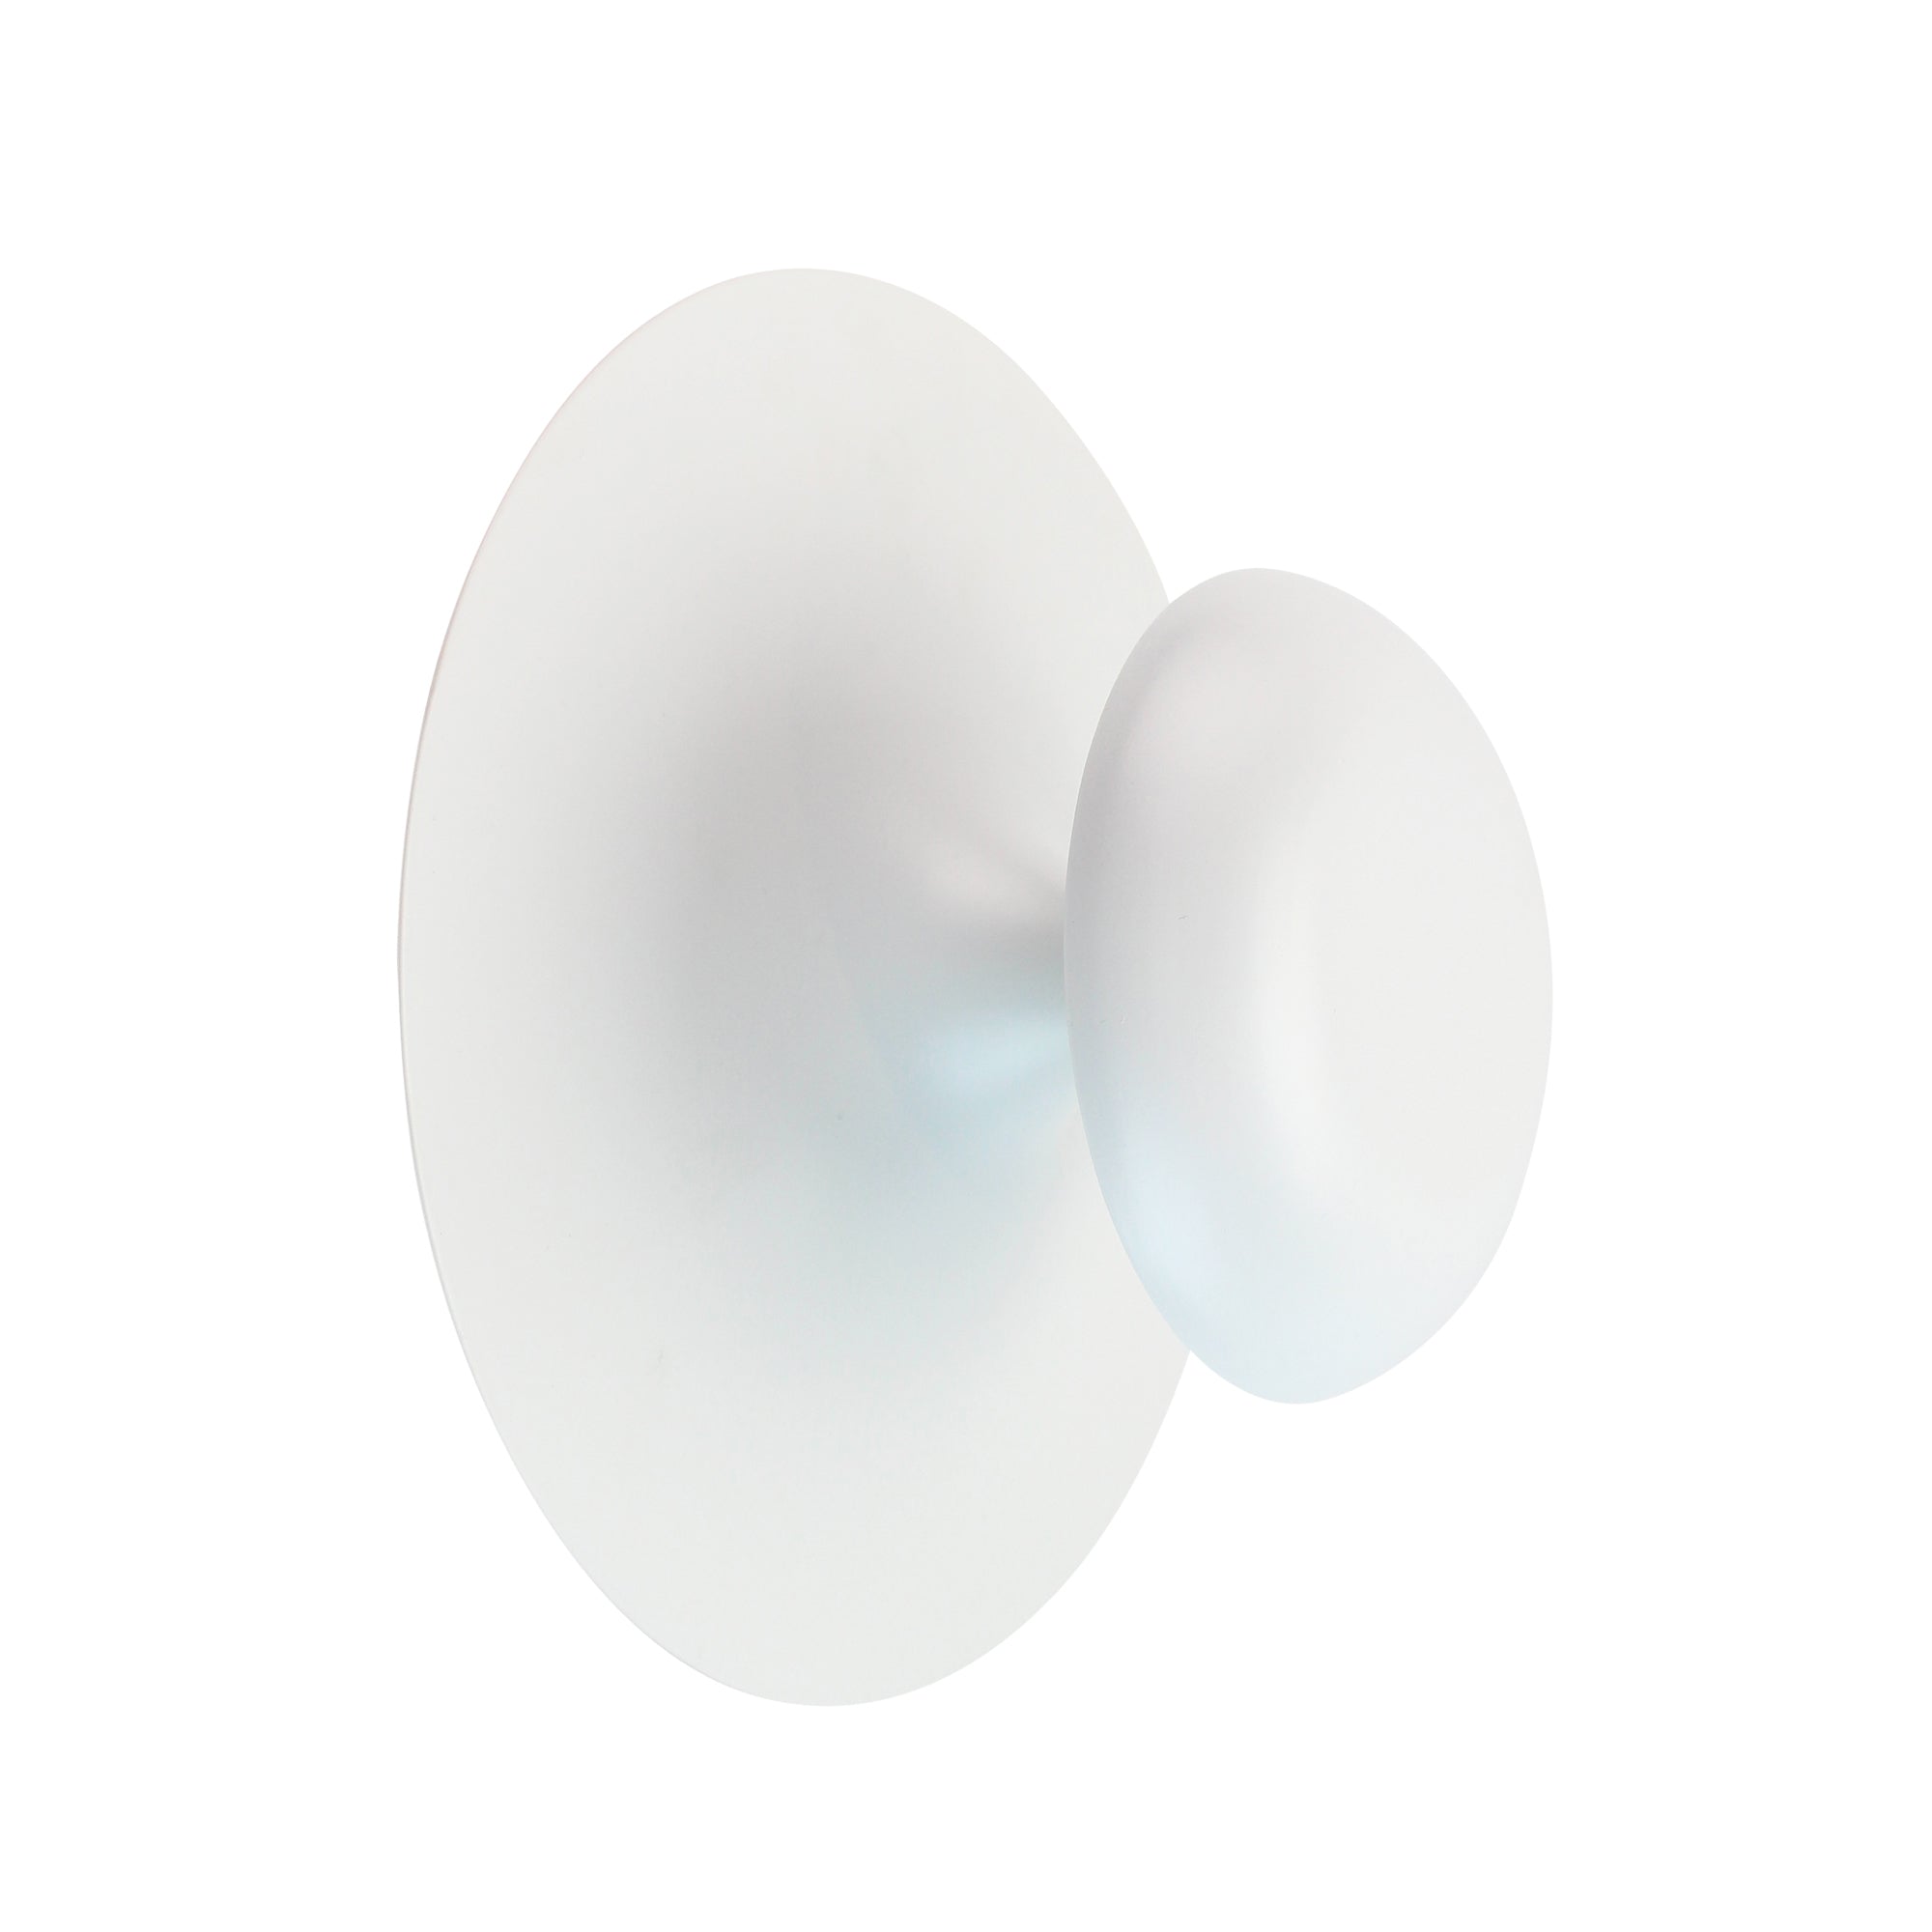 EuroFase Lighting, EUROFASE LIGHTING 14089-015 ELOM1 2 LIGHT SMALL WALL SCONCE, MODERN, WHITE